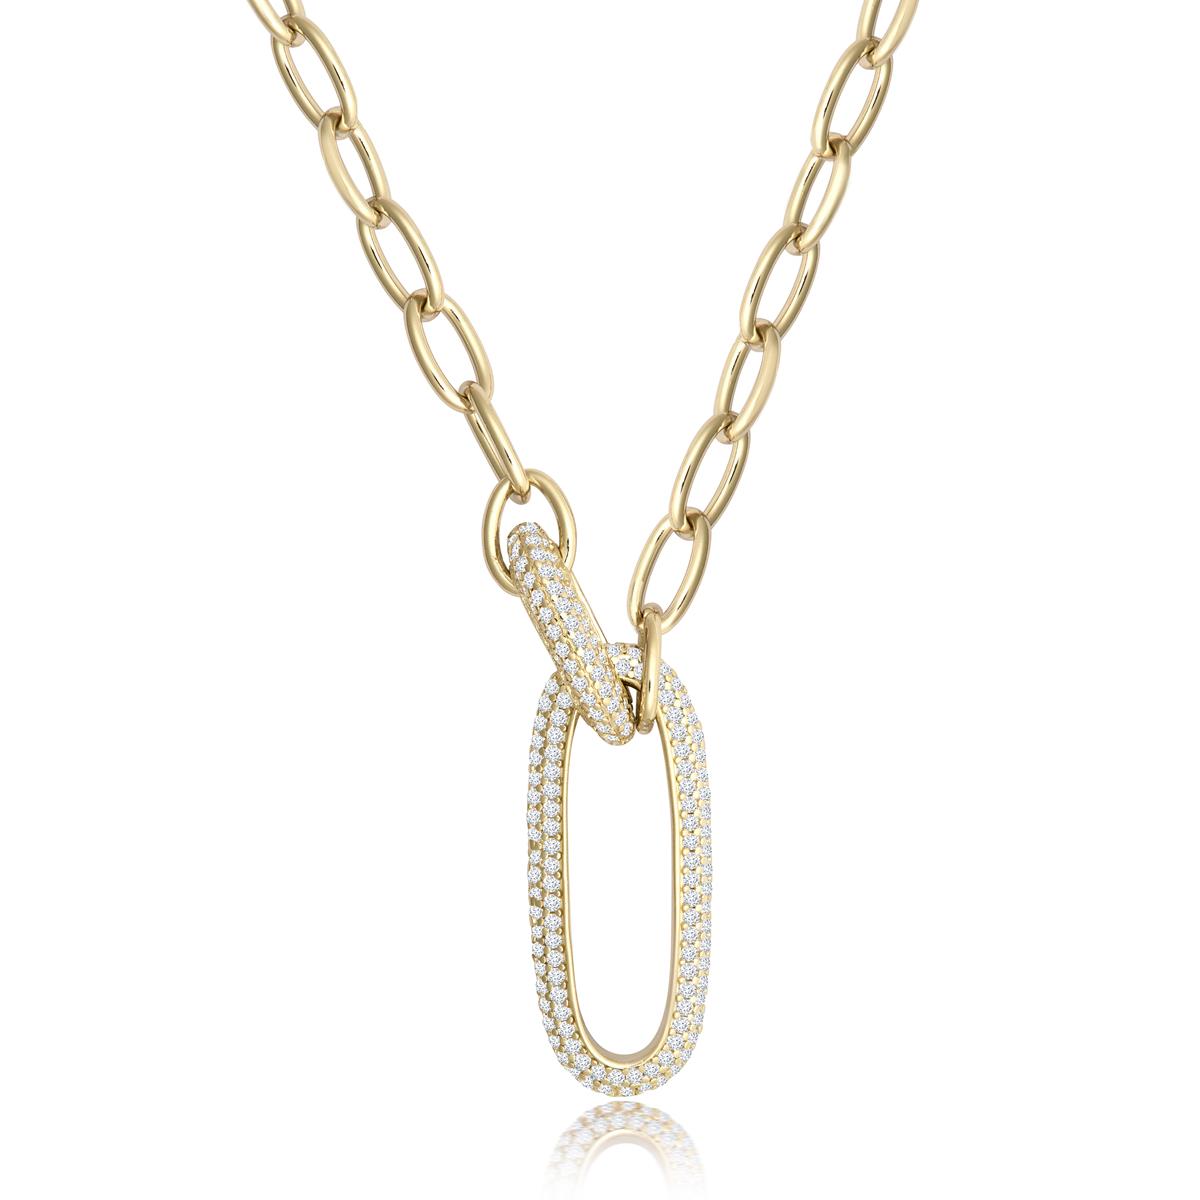 Achara Oblong Chain Style Link Zirconia Necklace - Gold 